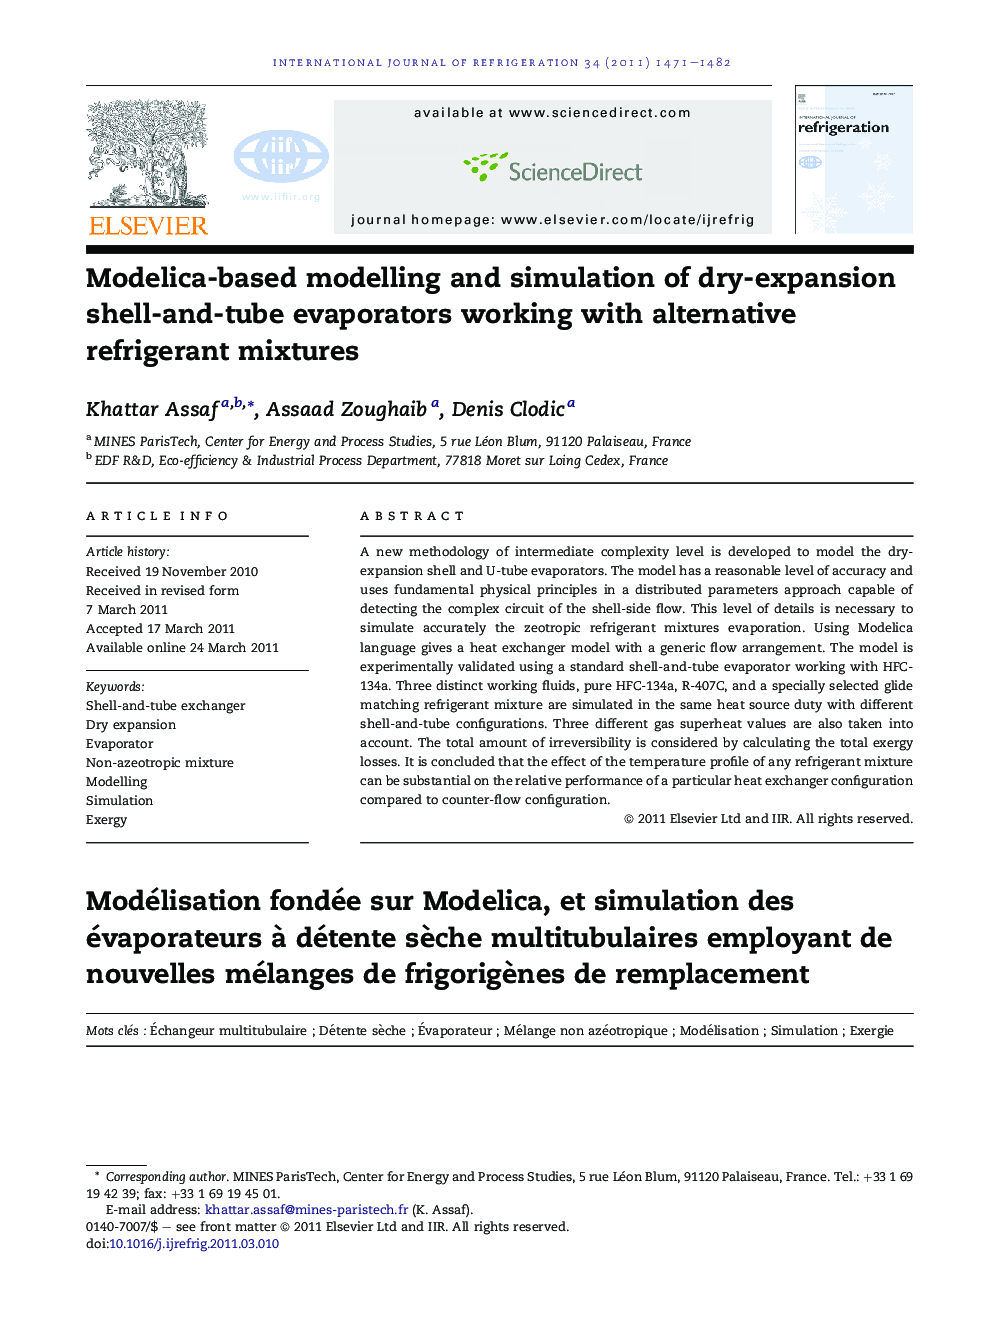 Modelica-based modelling and simulation of dry-expansion shell-and-tube evaporators working with alternative refrigerant mixtures